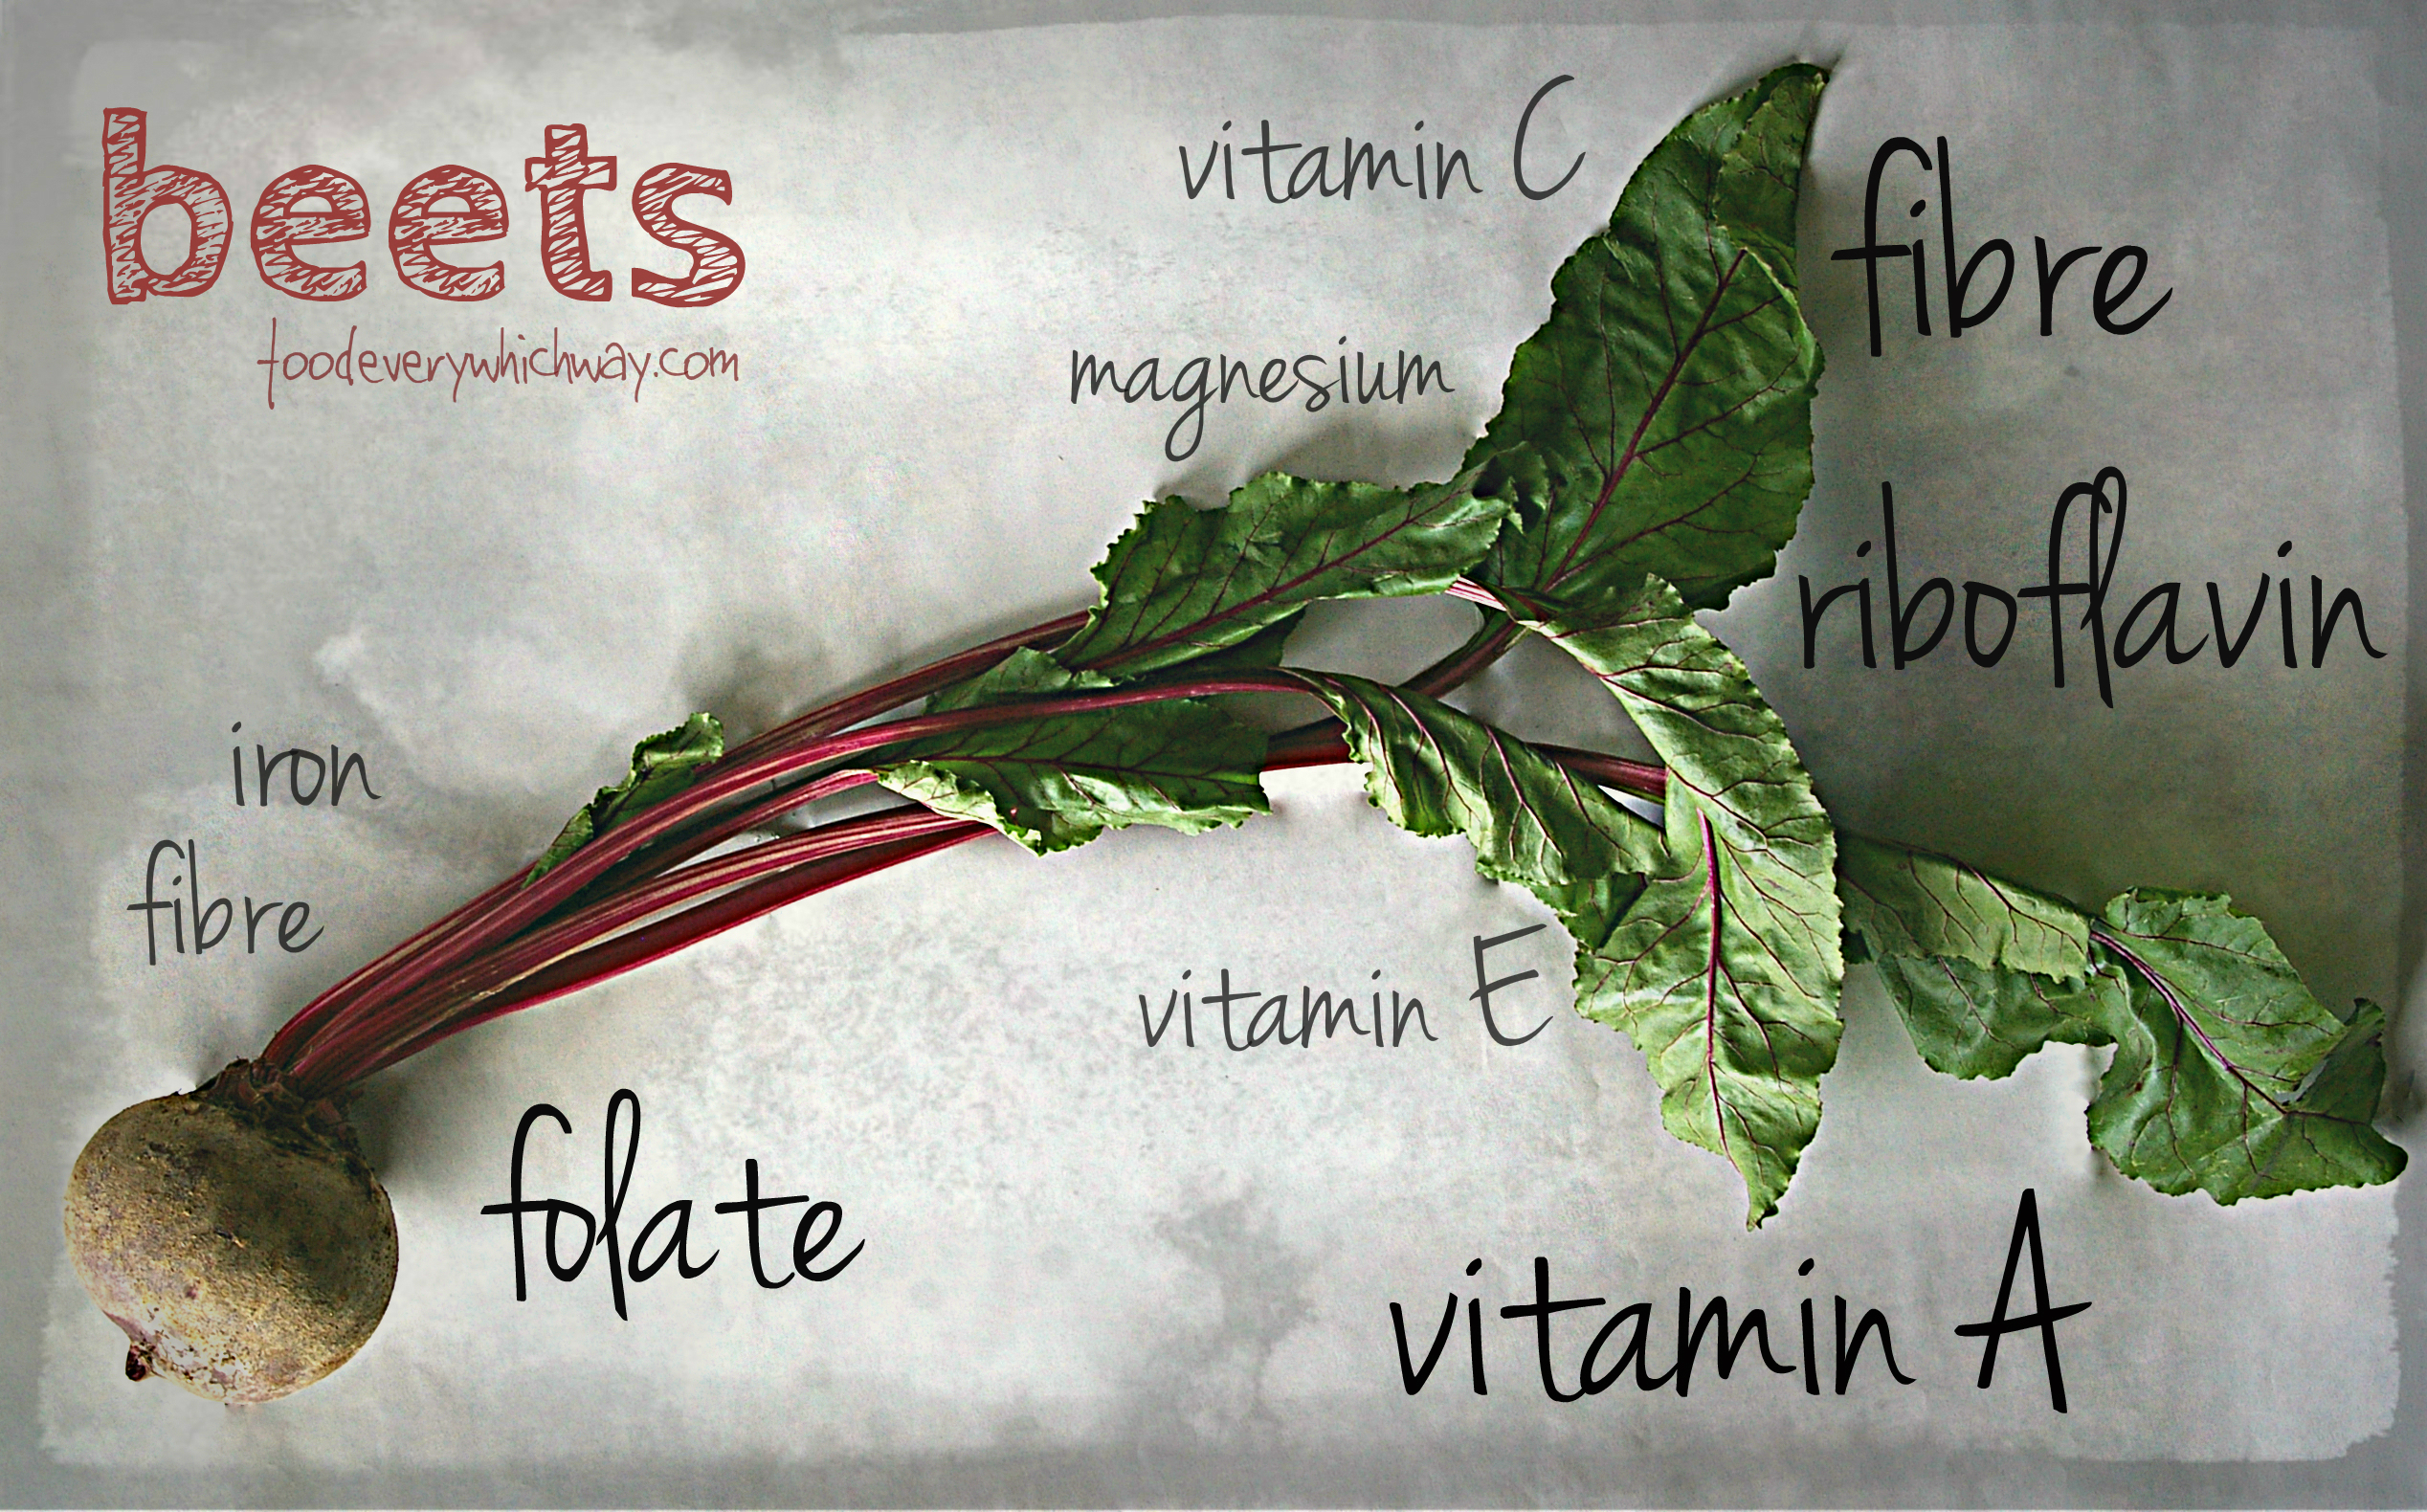 Beets Nutrition